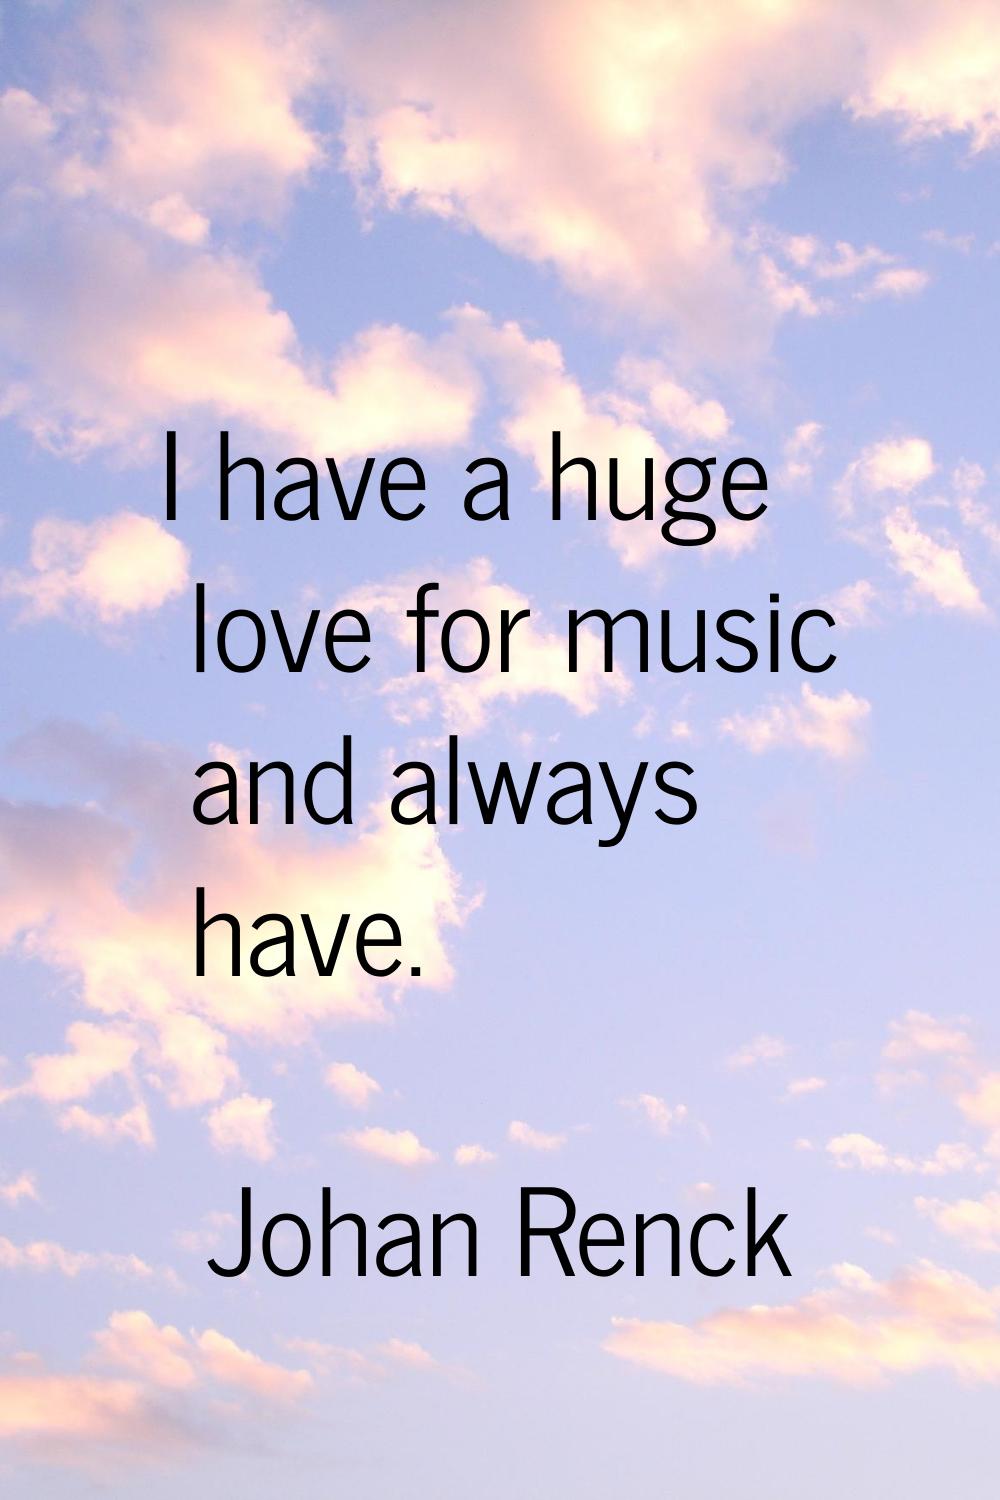 I have a huge love for music and always have.